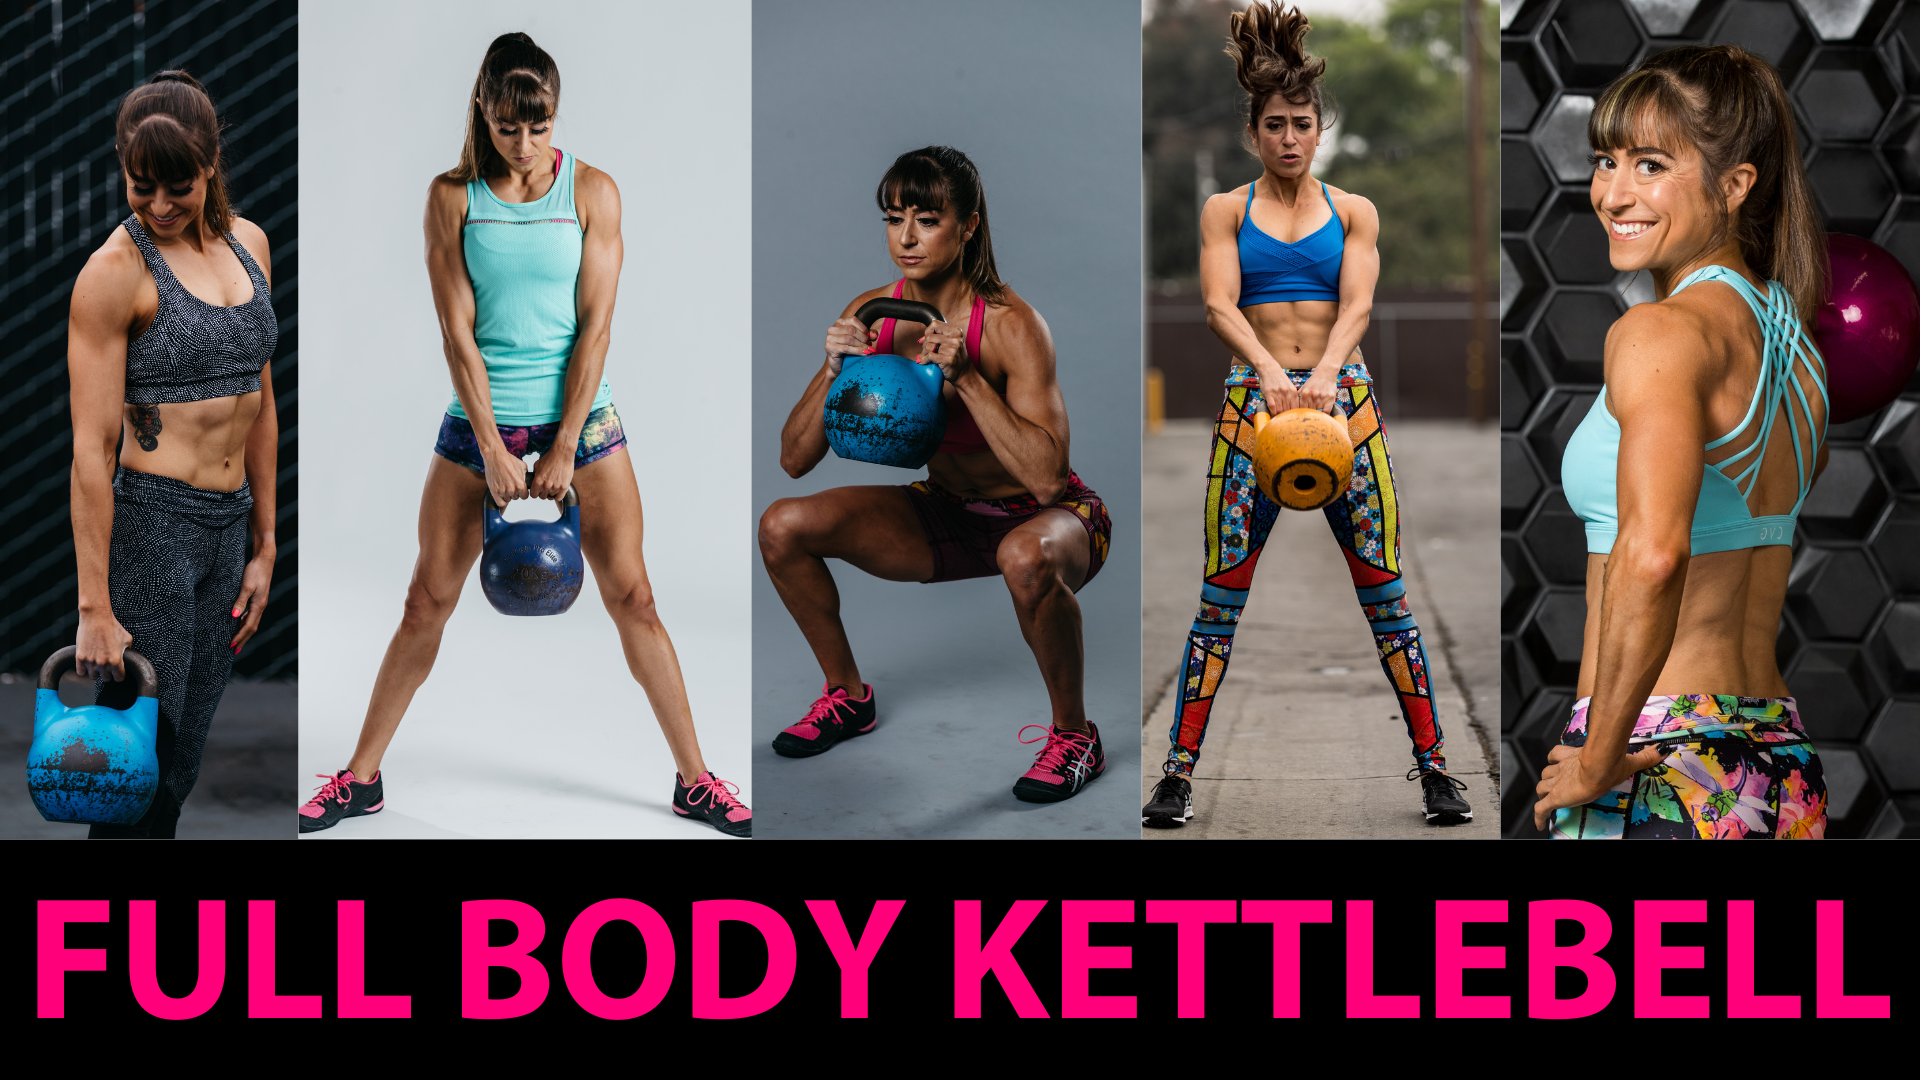 10 Kettlebell Exercises For A Total Body Workout